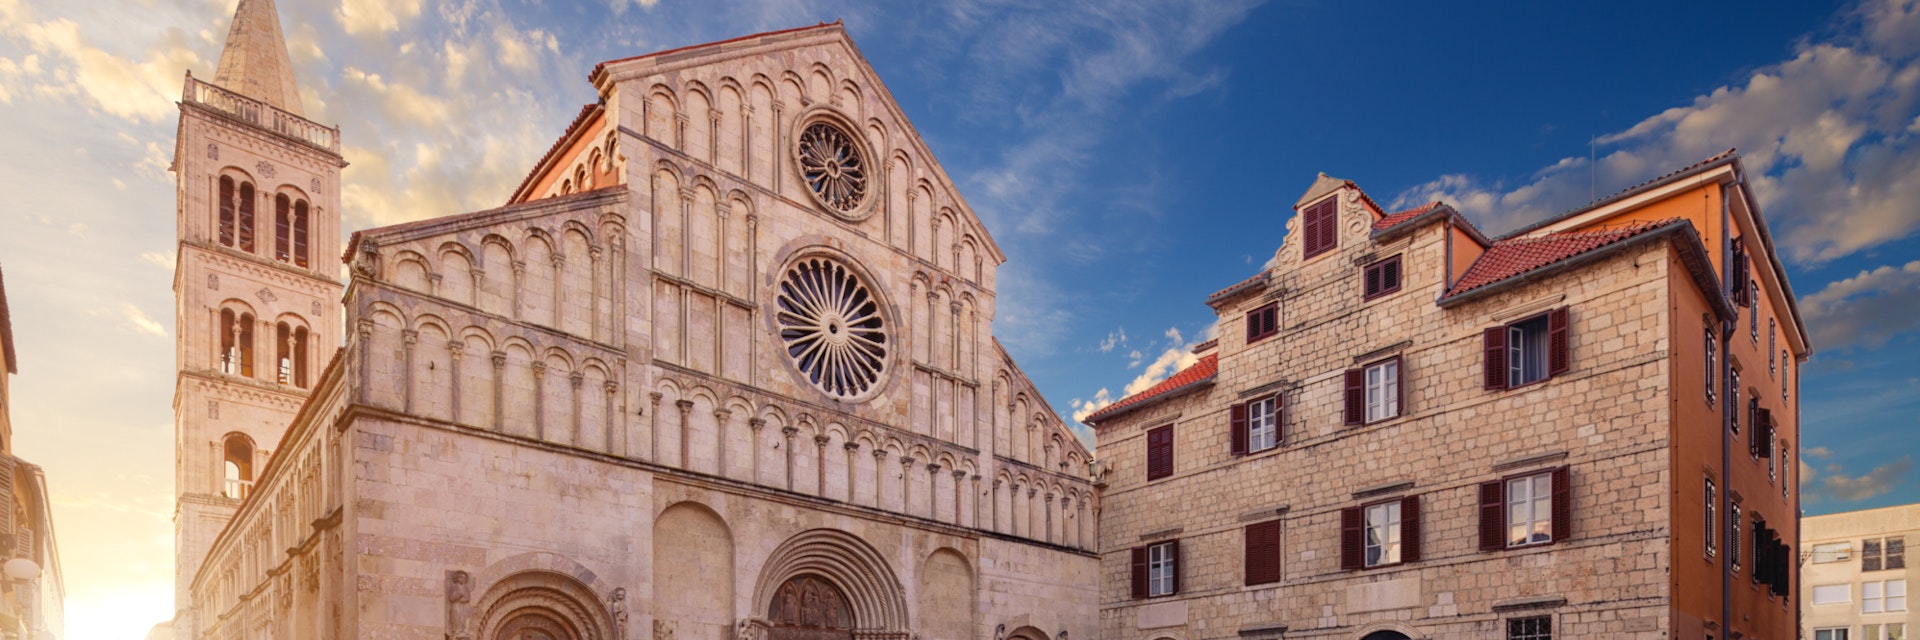 The Cathedral of St. Anastasia,  Roman Catholic cathedral in Zadar, Croatia; Shutterstock ID 770384290; Your name (First / Last): Anna Tyler; GL account no.: 65050; Netsuite department name: Online Editorial; Full Product or Project name including edition: destination-image-southern-europe